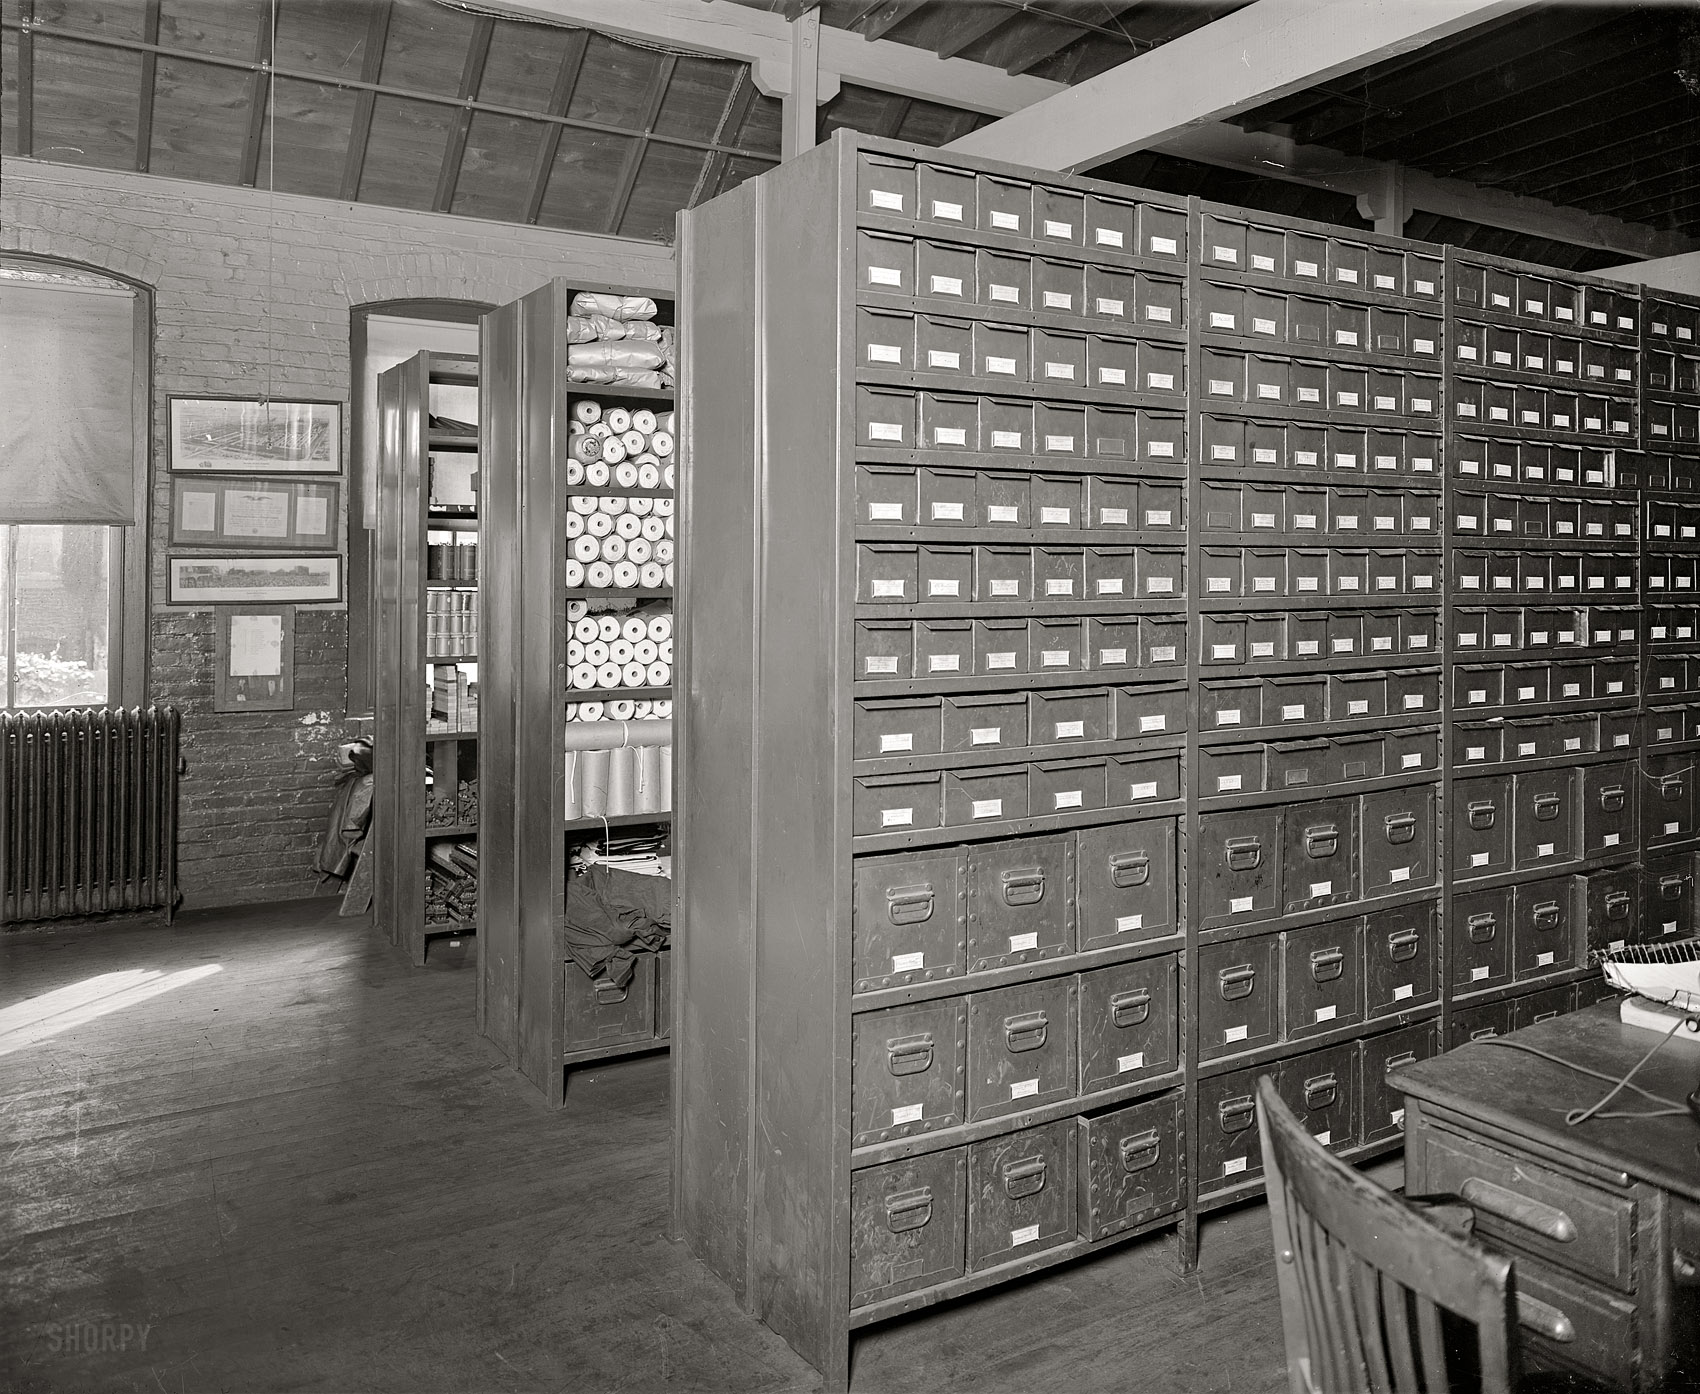 Another look at the operations of the Chesapeake & Potomac Telephone Co. in Washington circa 1925. National Photo Co. glass negative. View full size.